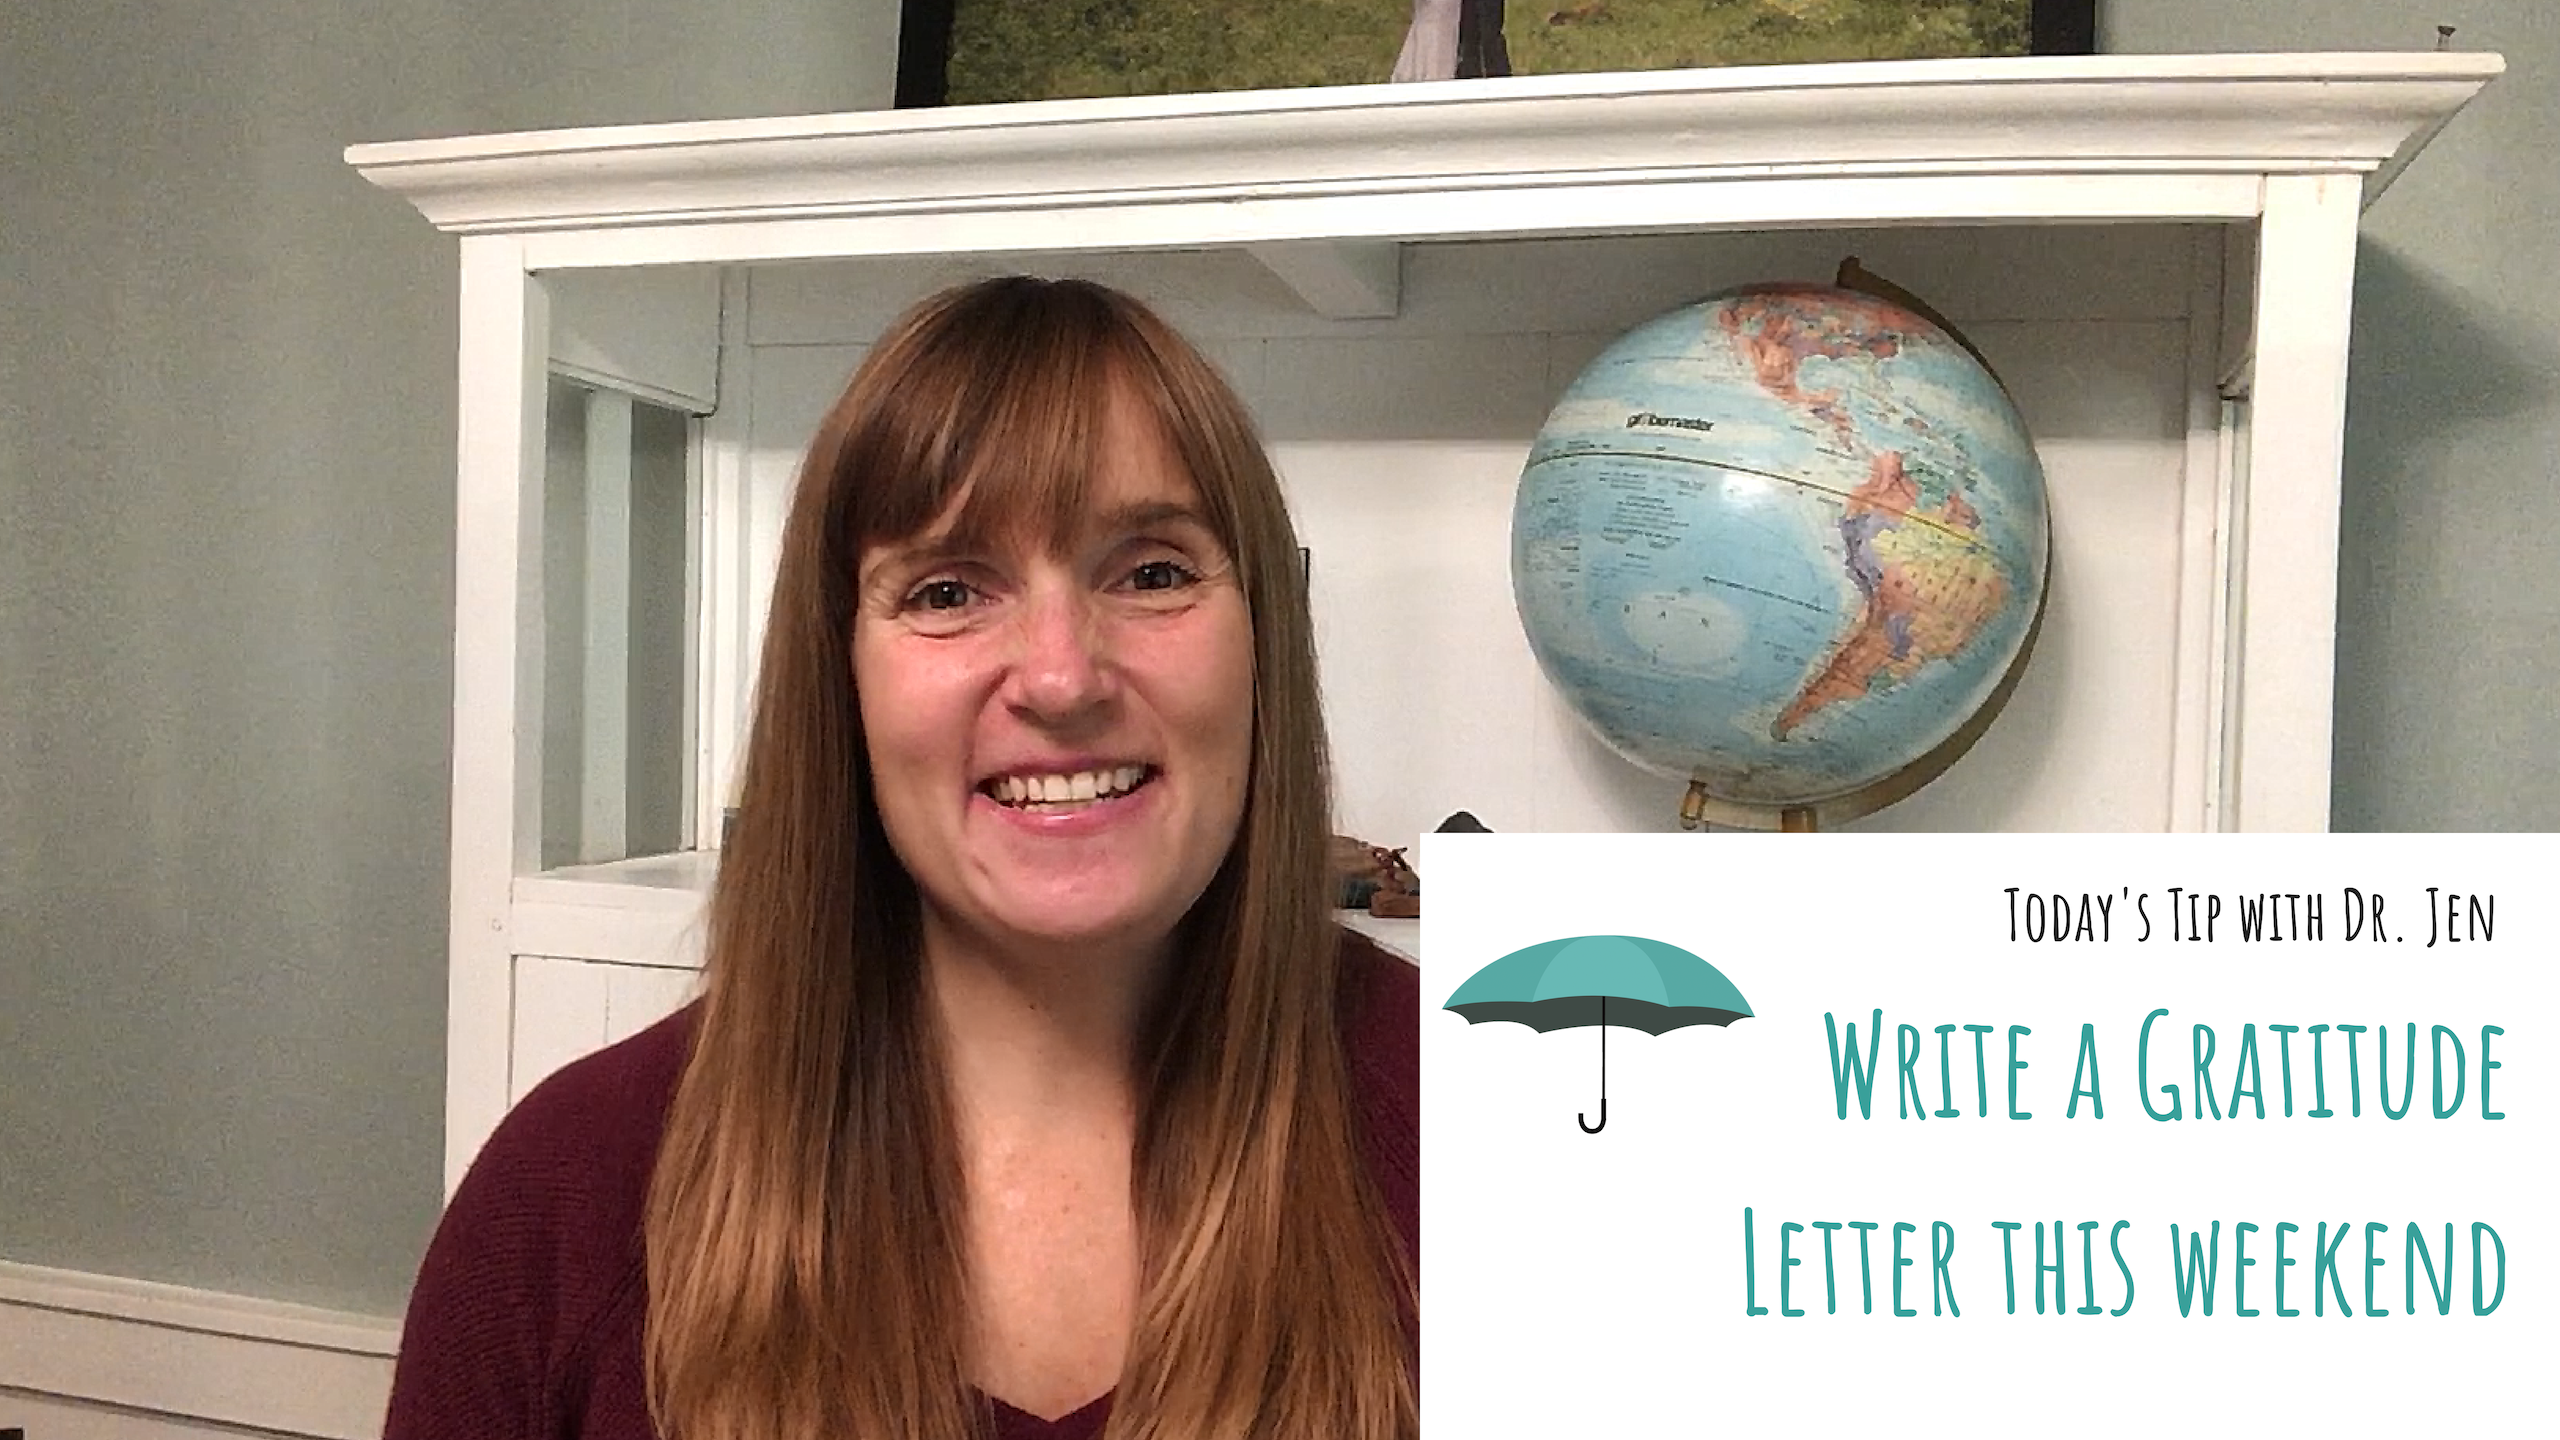 Today’s Tip with Dr. Jen: Write a Gratitude Letter this Weekend